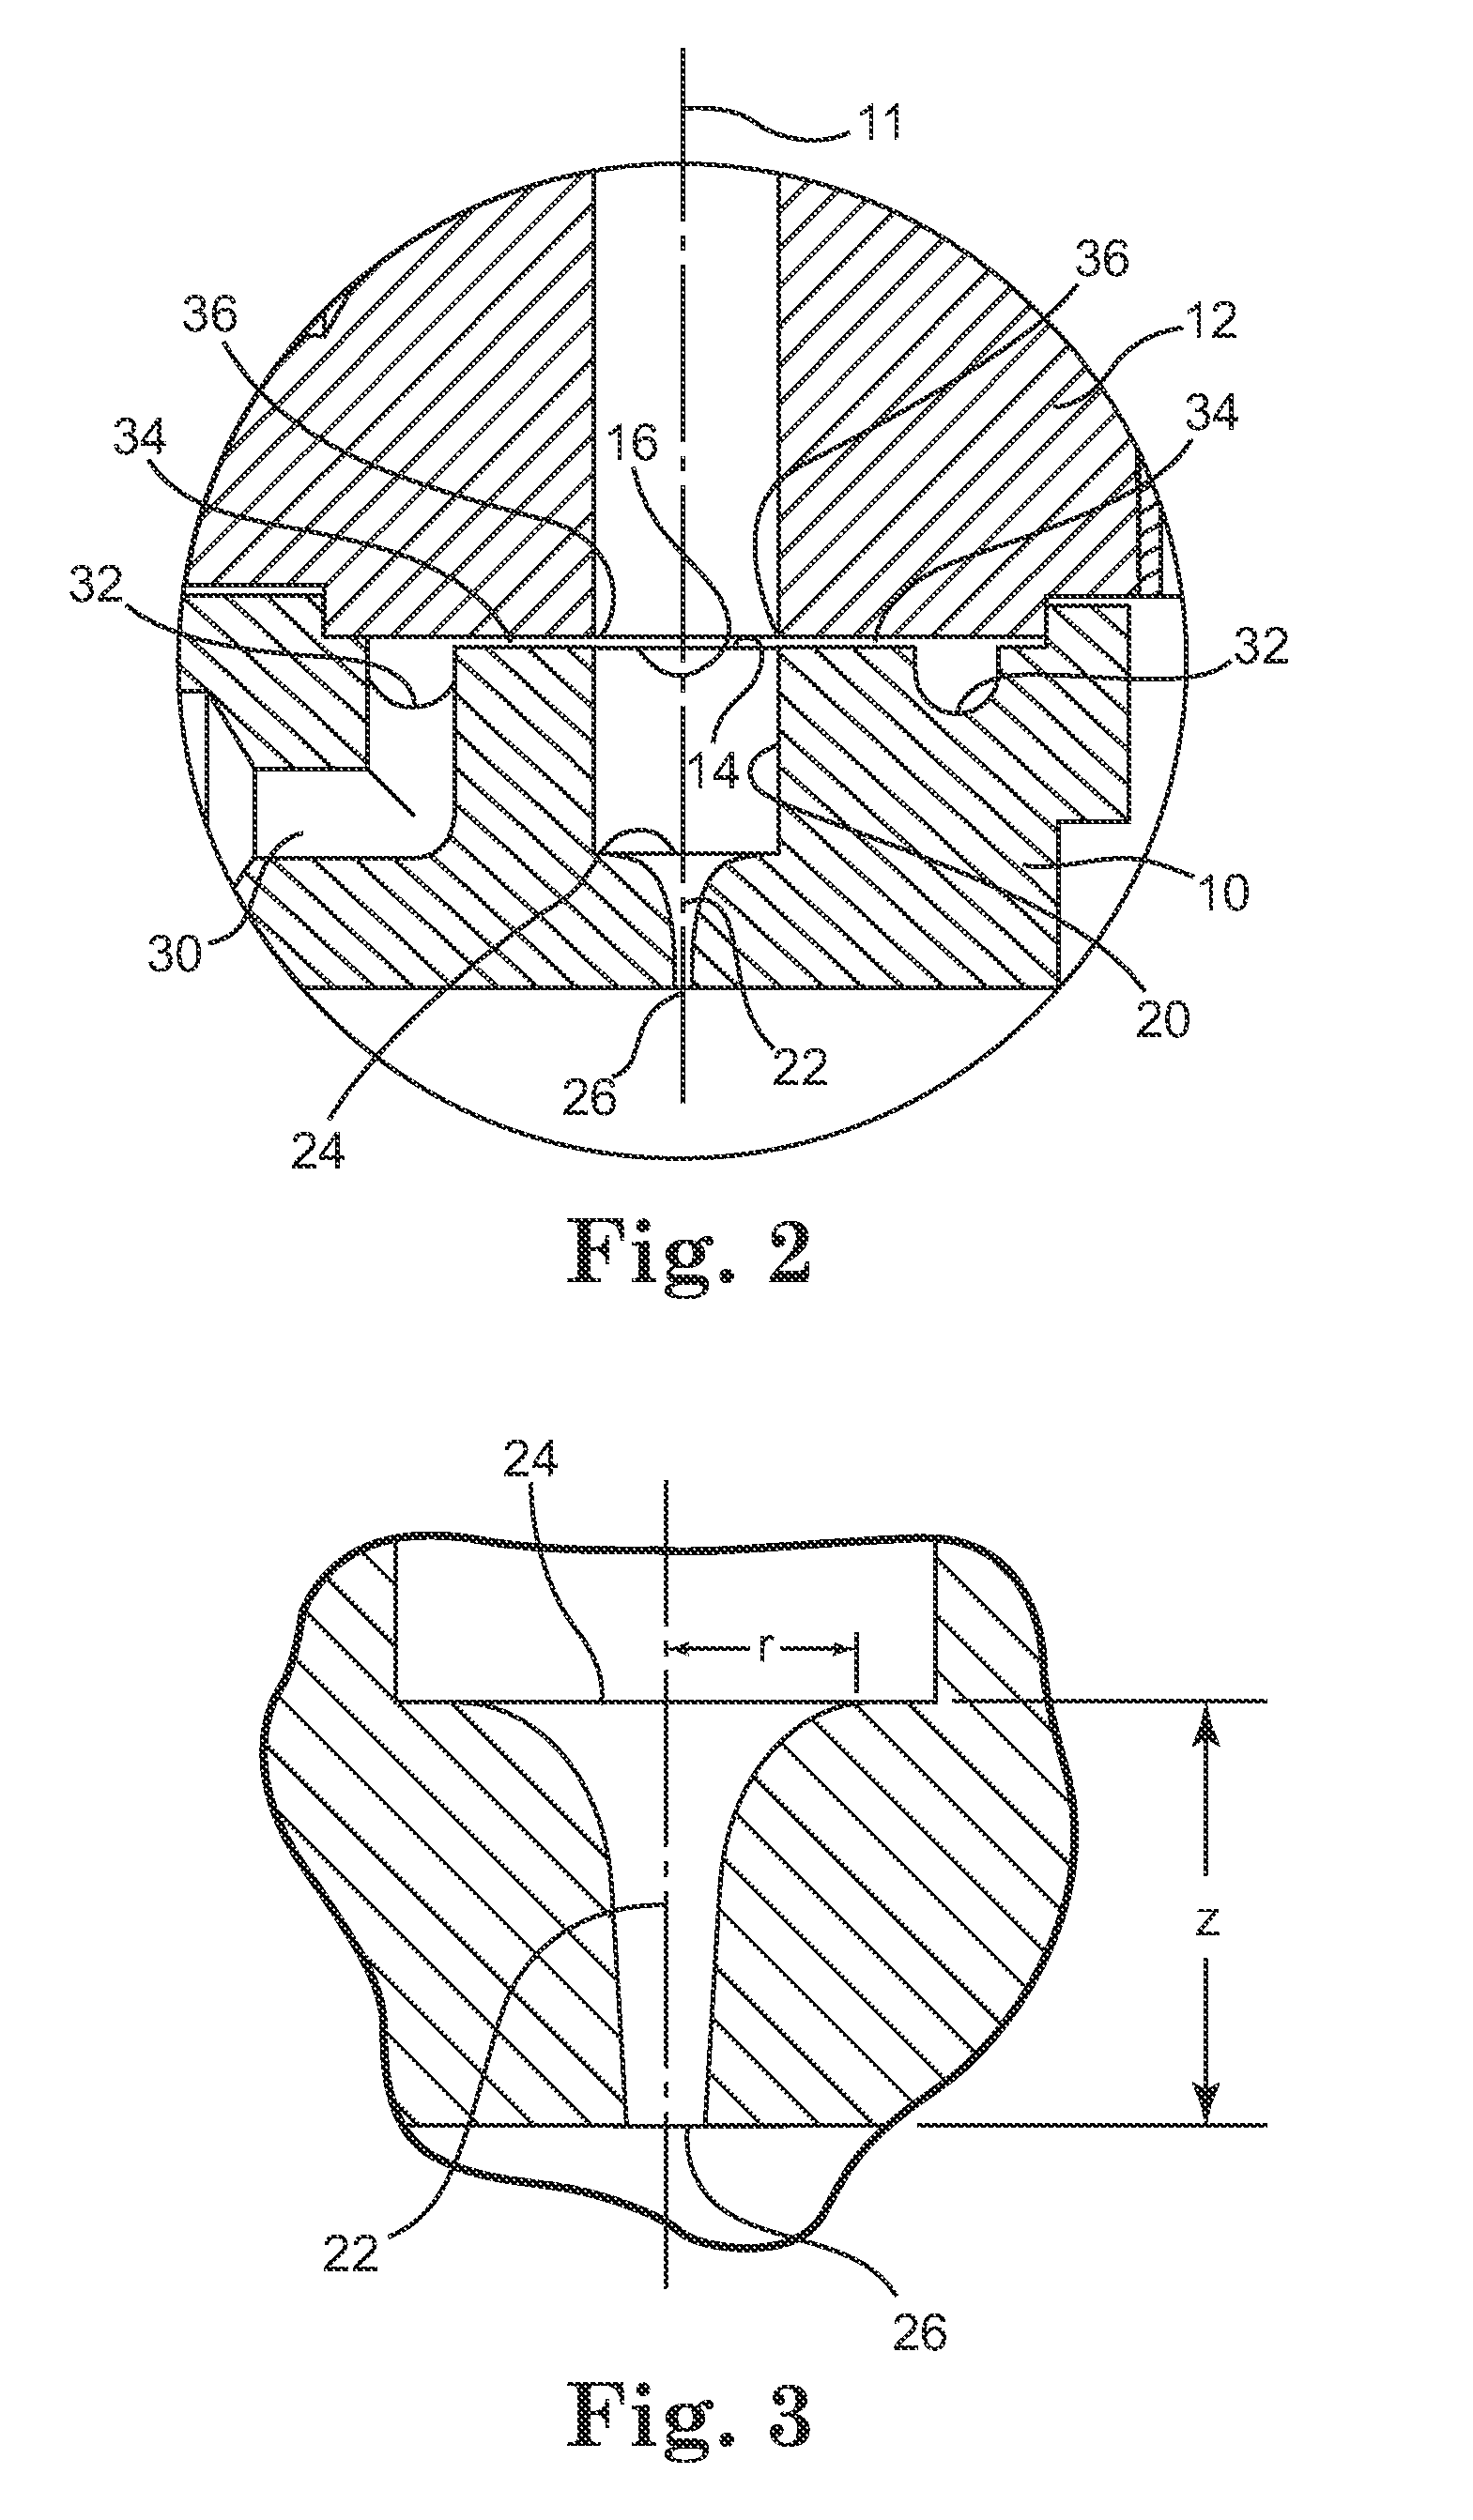 Melt extruded fibers and methods of making the same